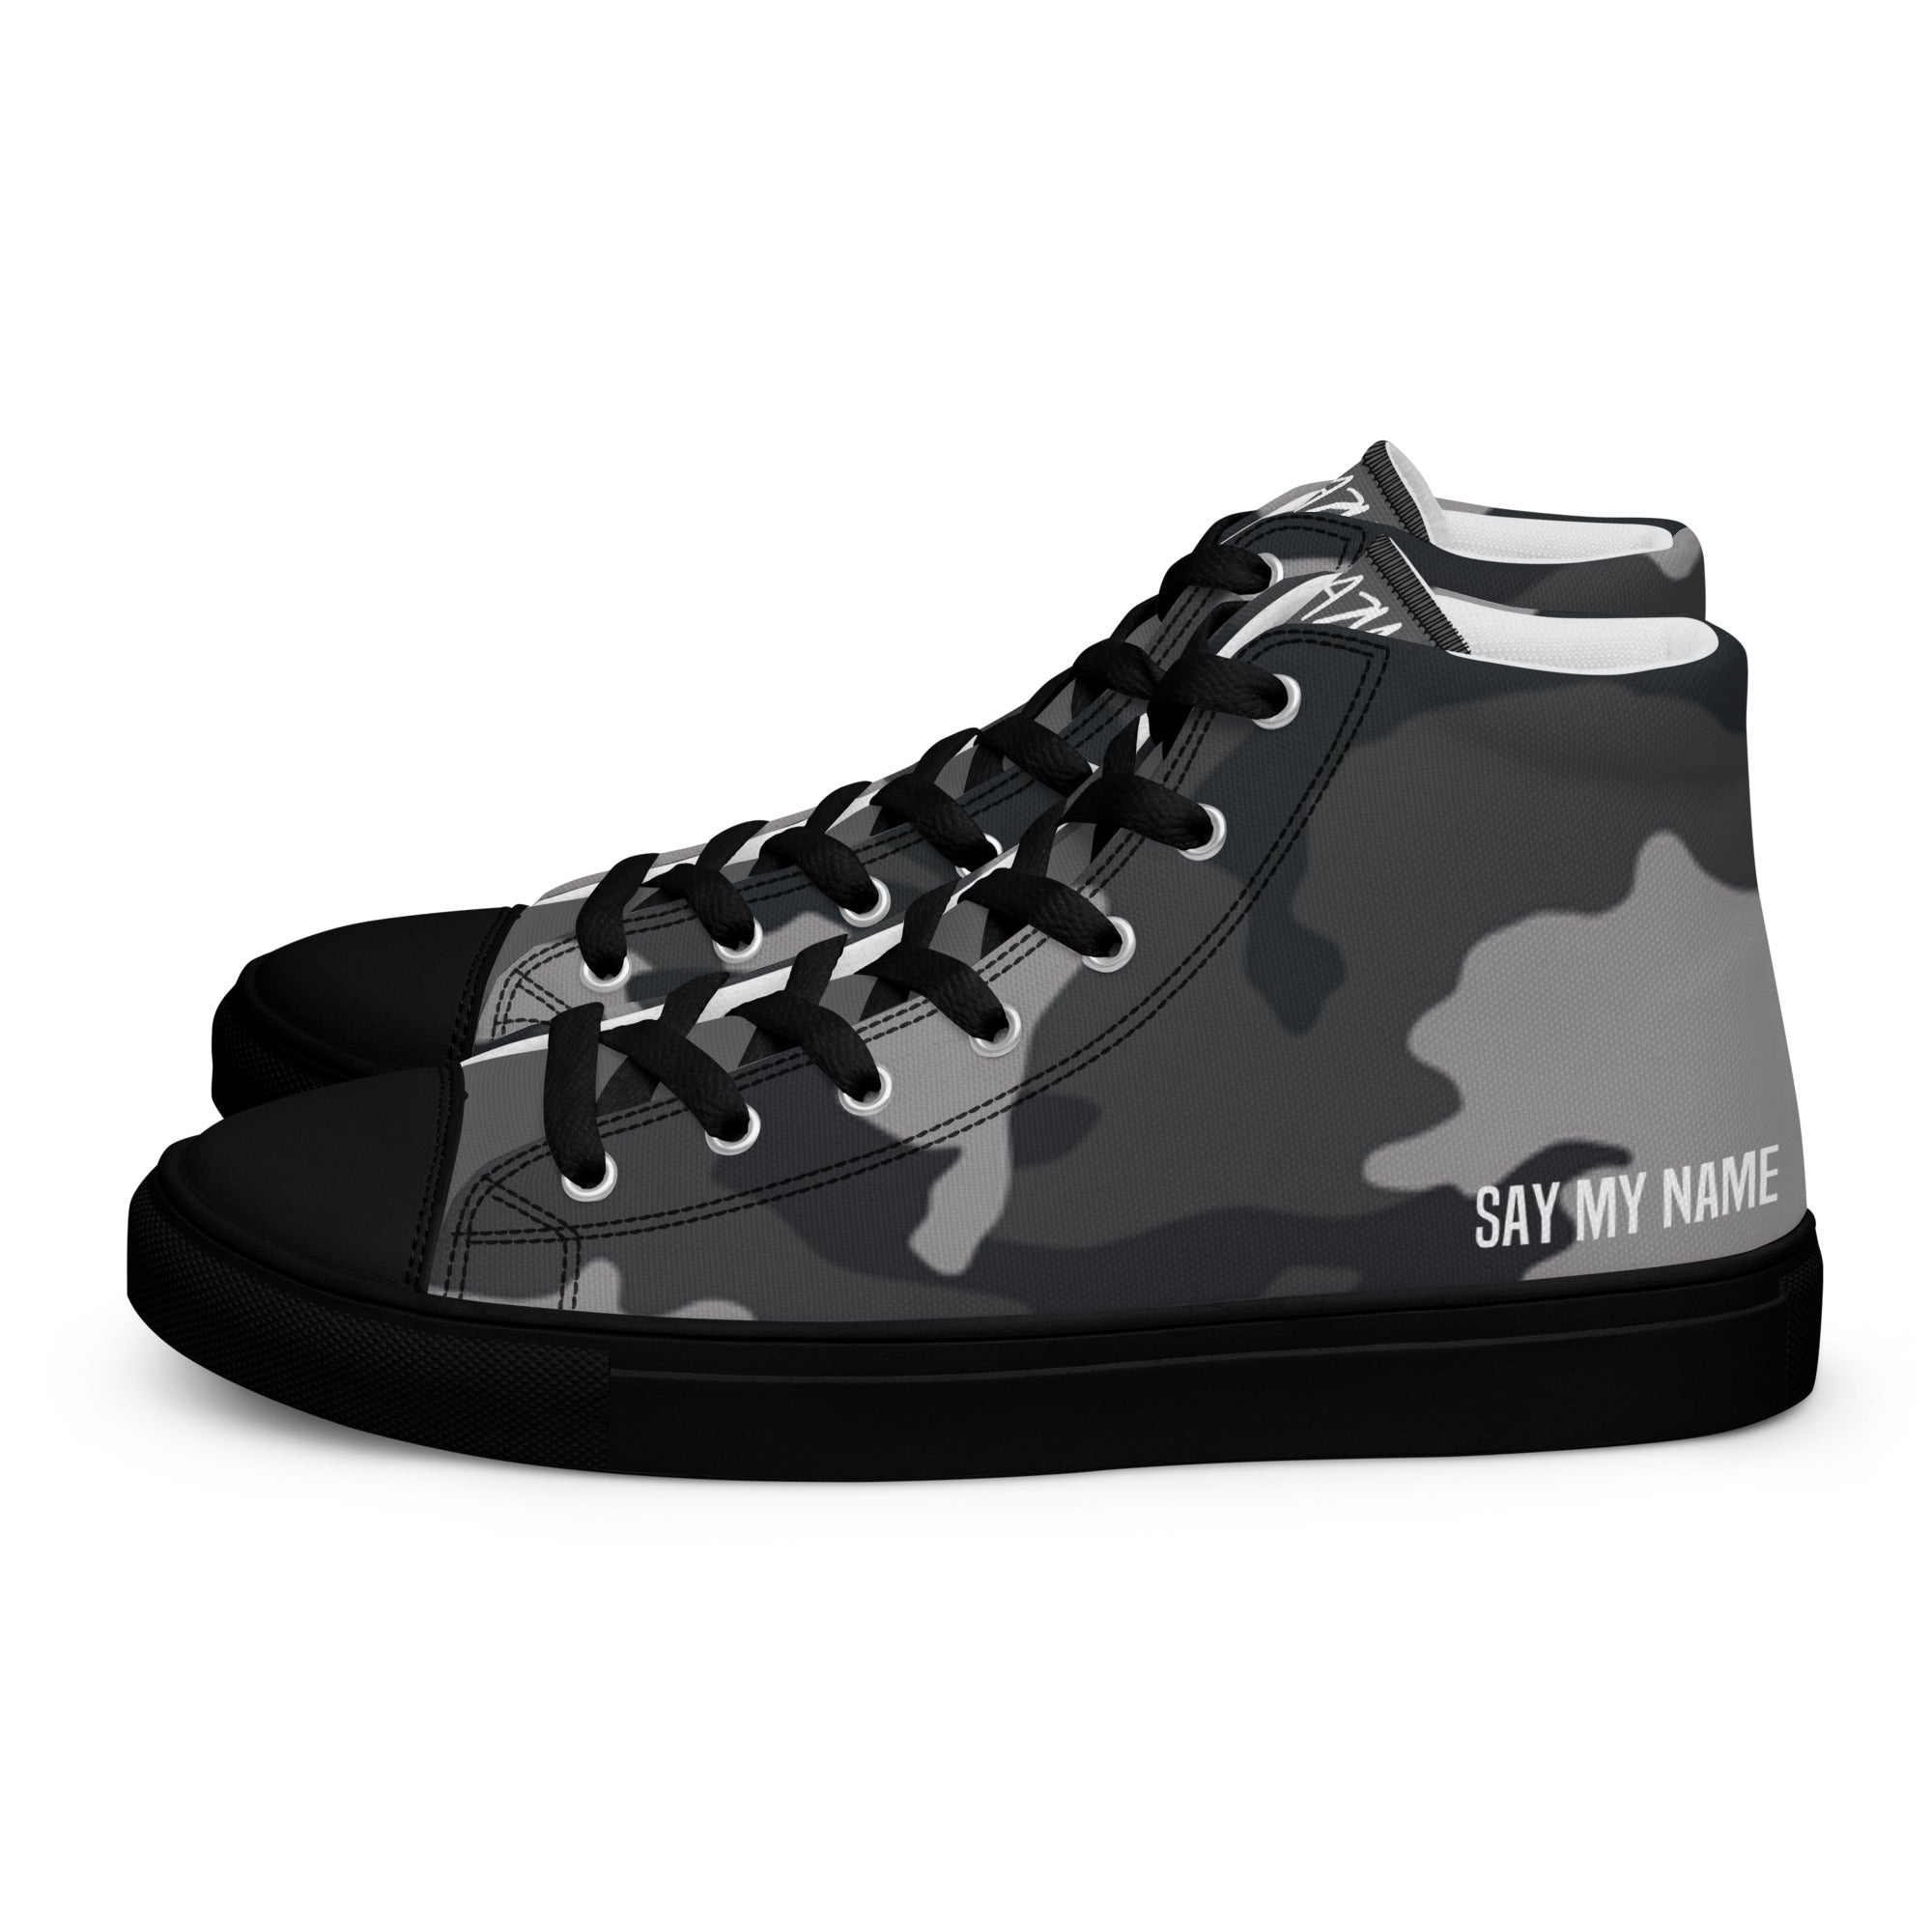 Women's gray camouflage high-top sneakers in "SAY MY NAME" canvas